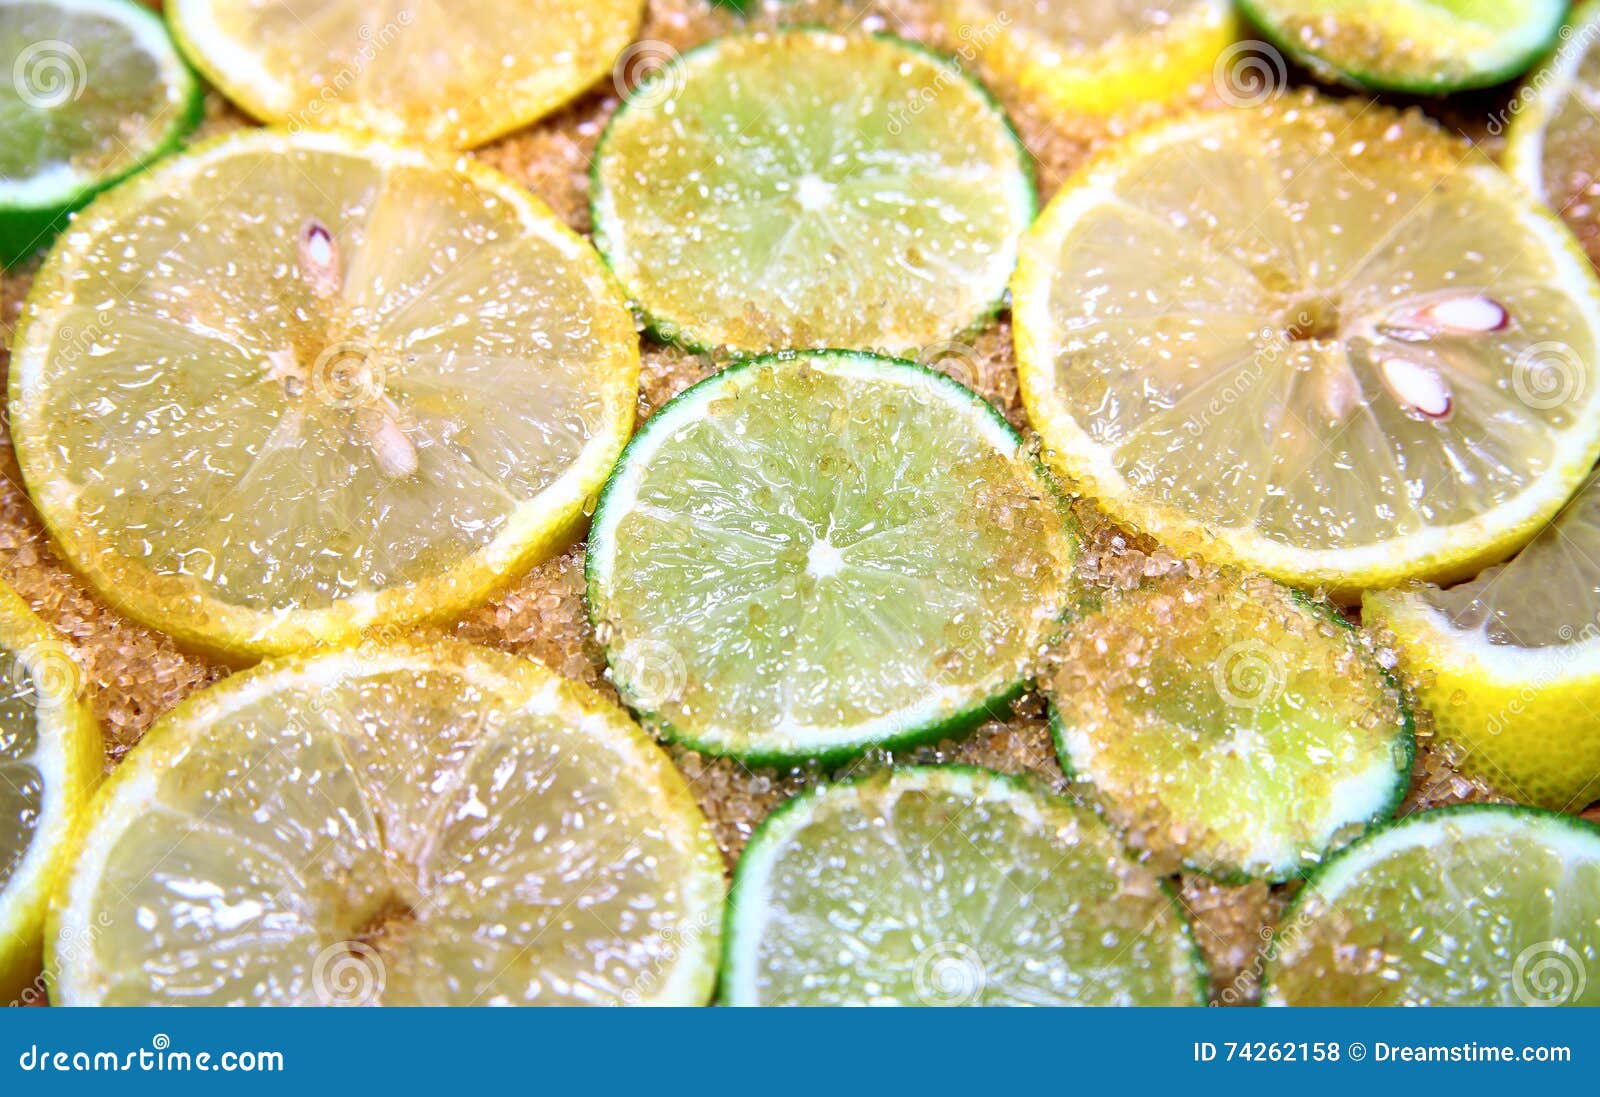 View on slices of limes and lemons mixed with cane sugar placed flat on the ground